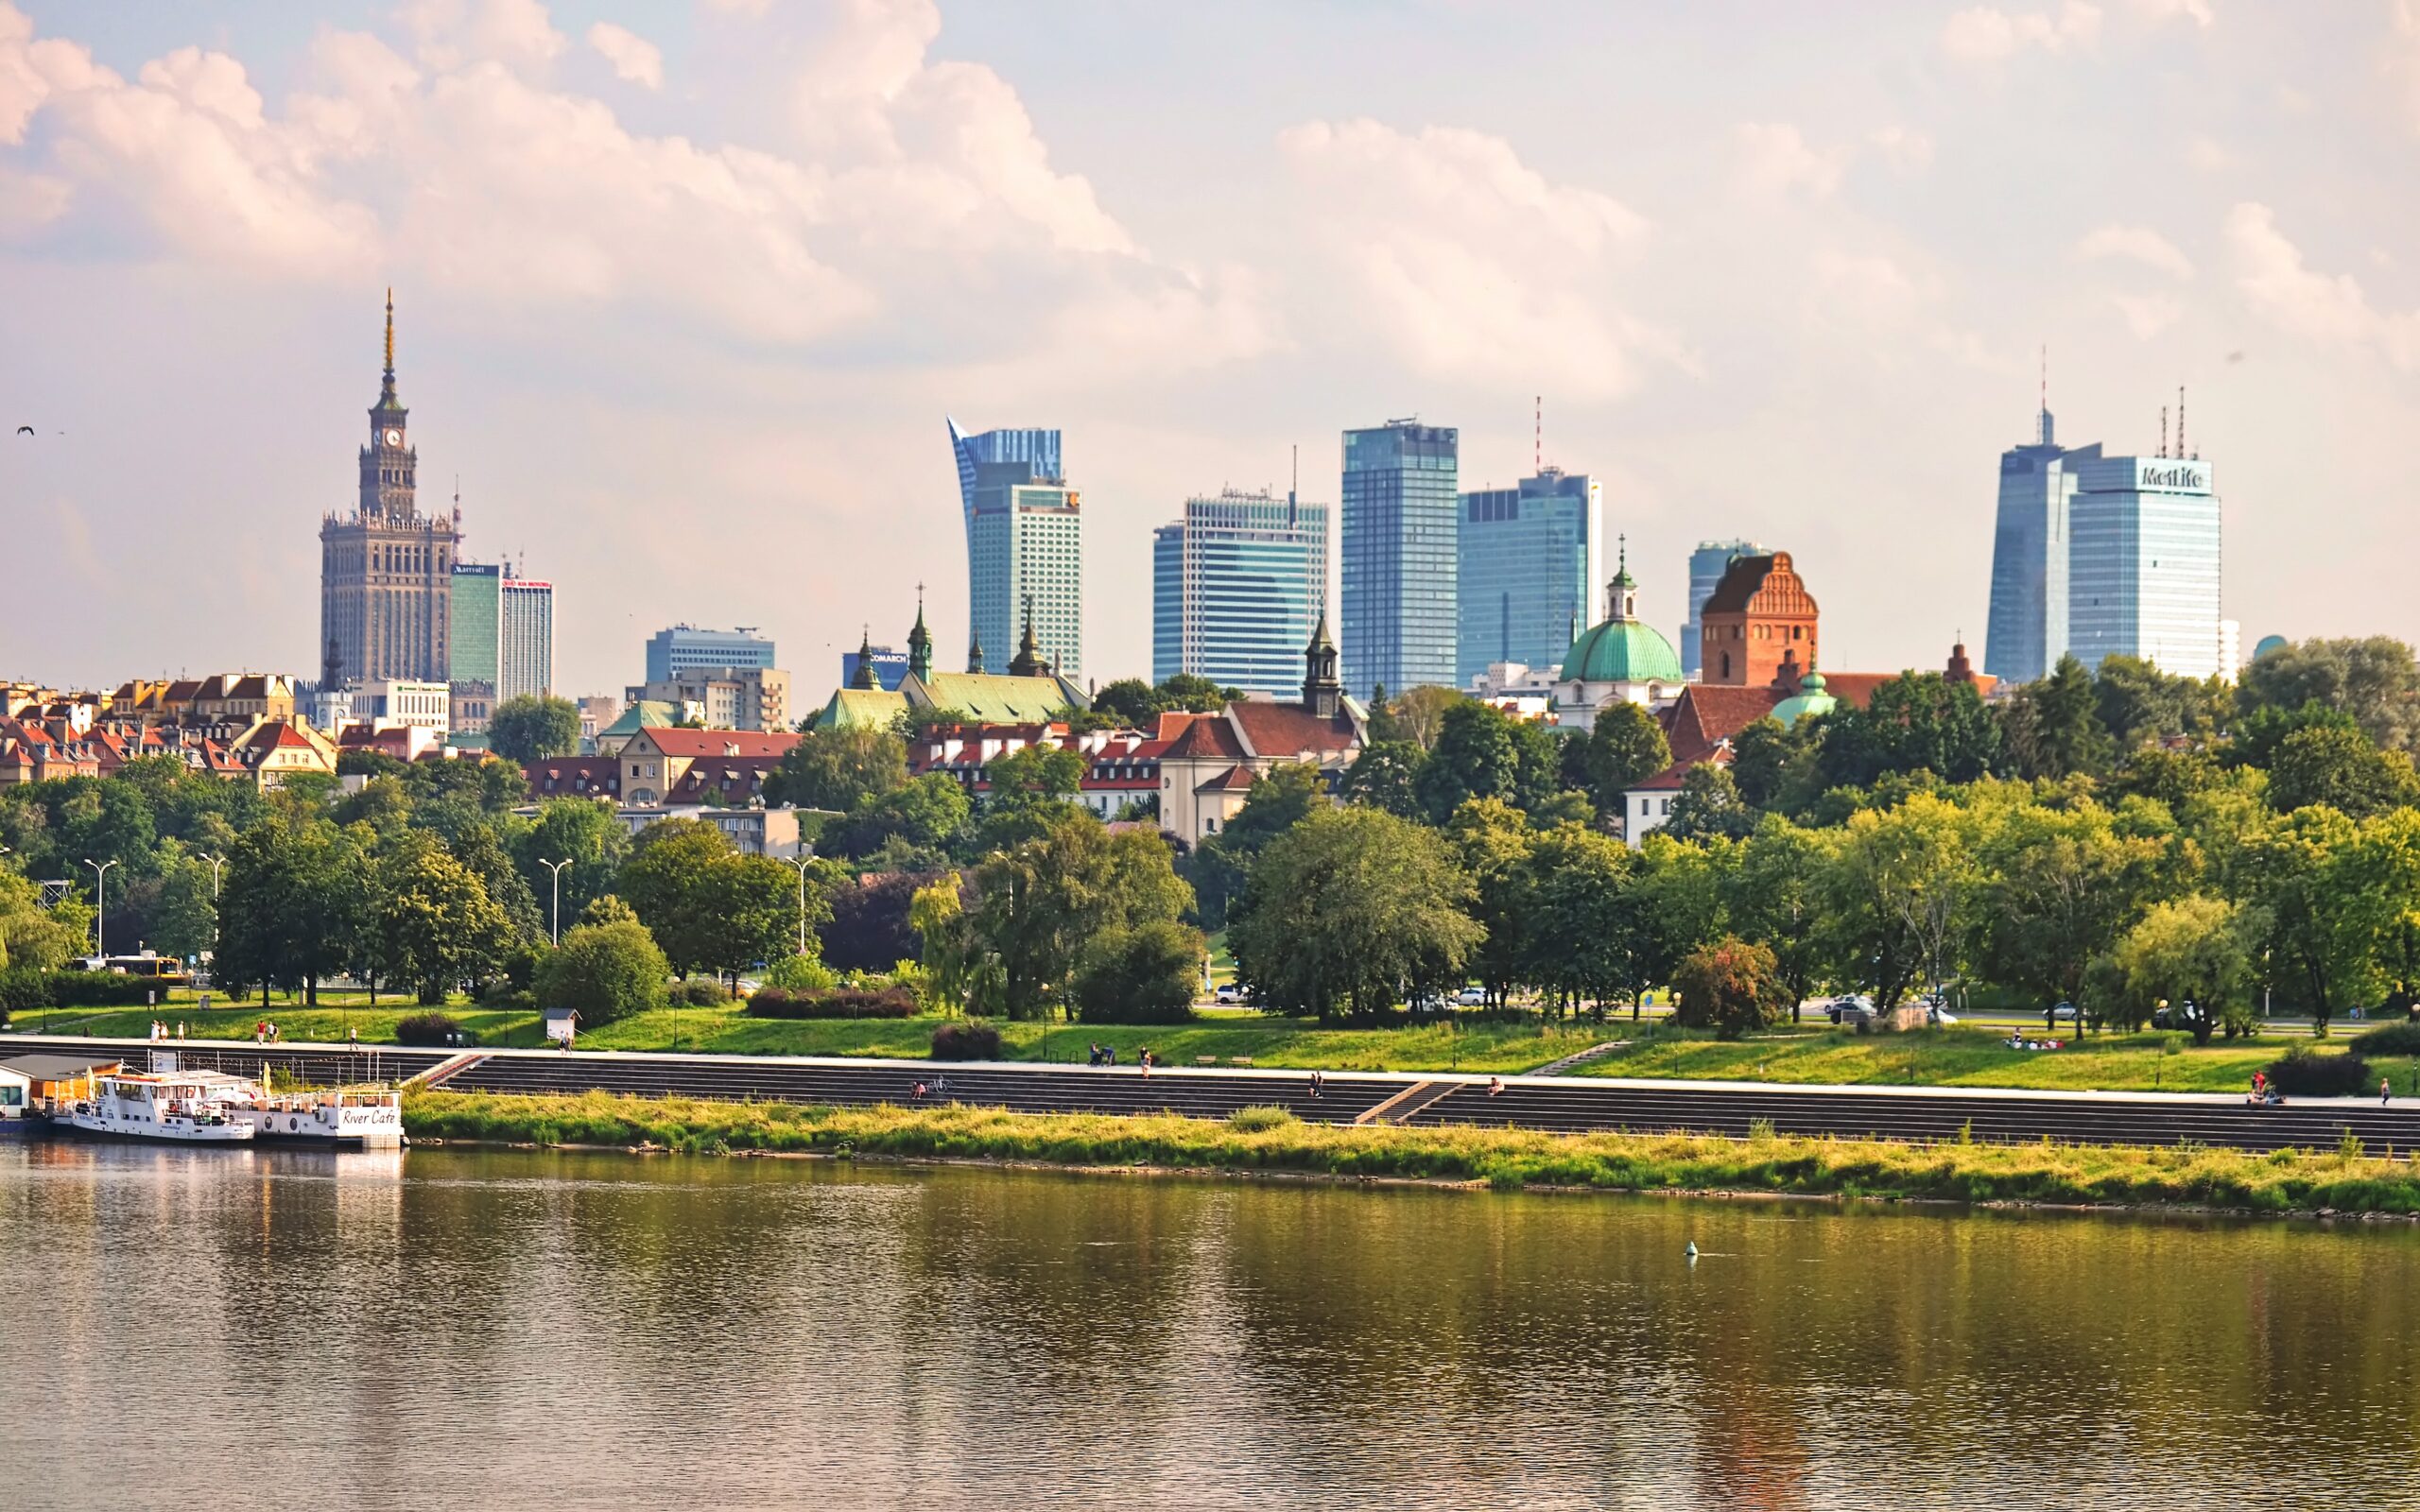 Poland: Stable and secure destination even during turbulent times | Meet our community